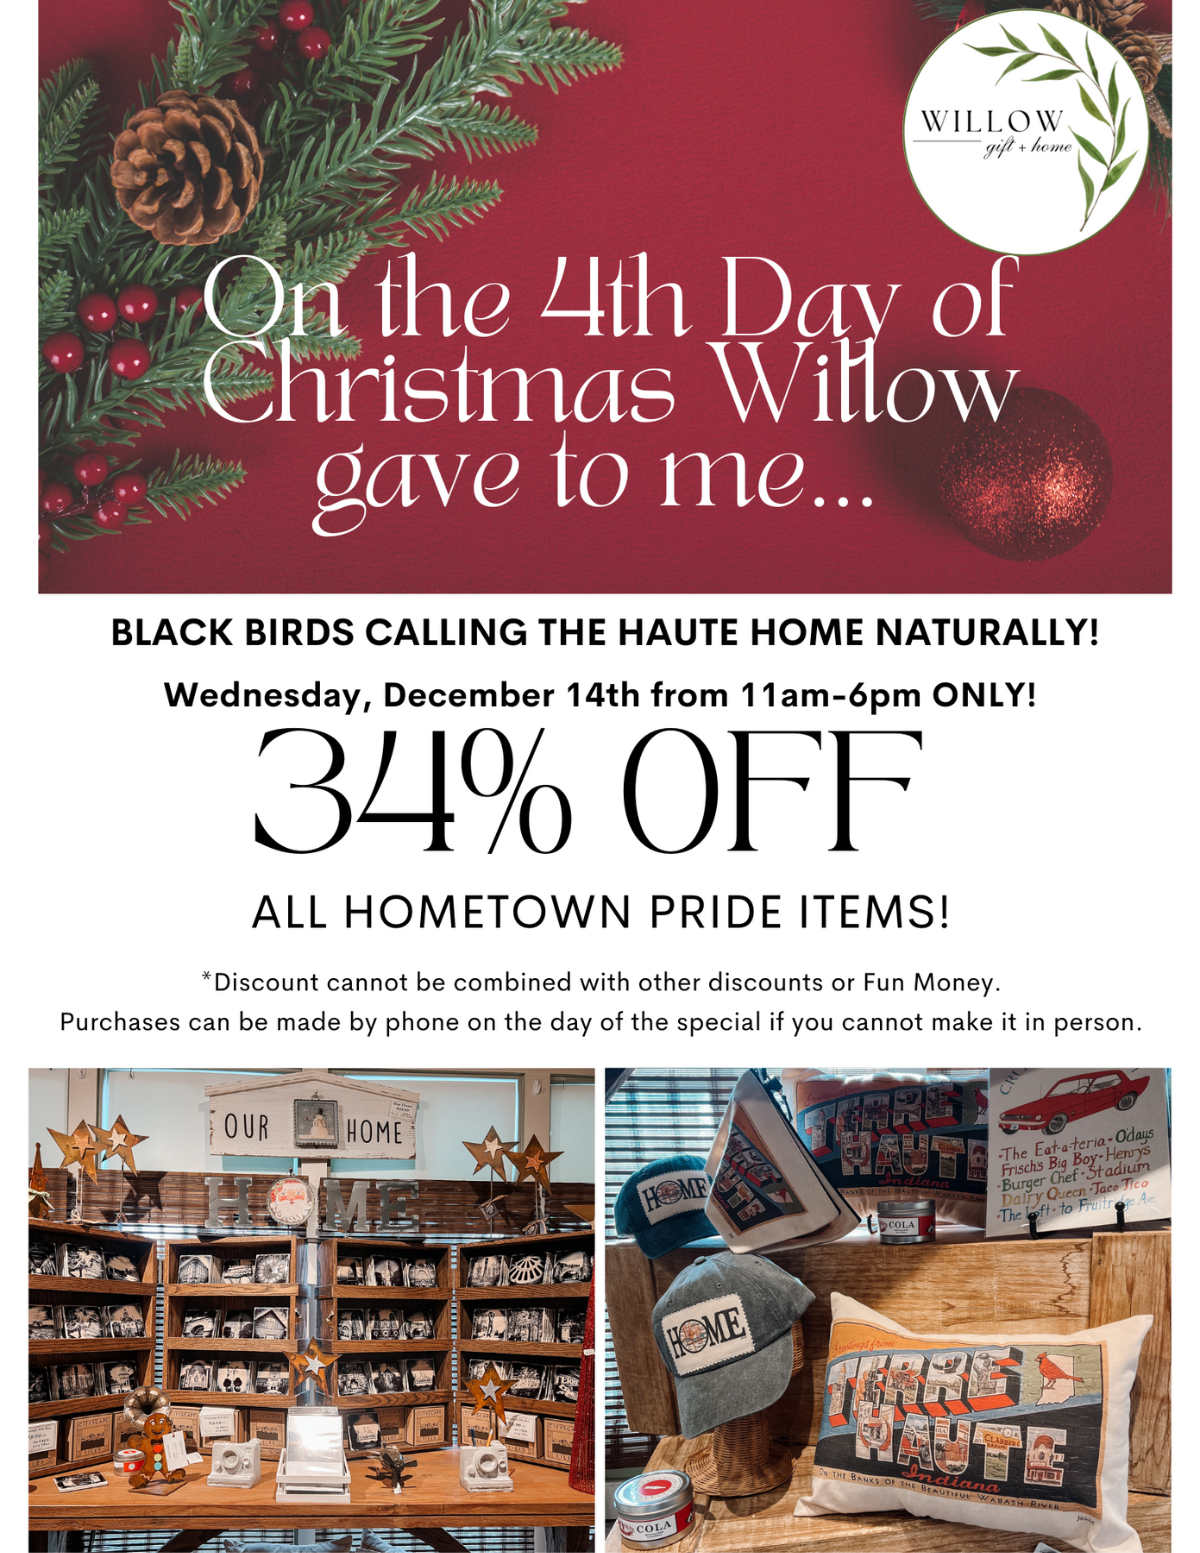 34% OFF Hometown Pride items for 4th Day of Christmas at Willow